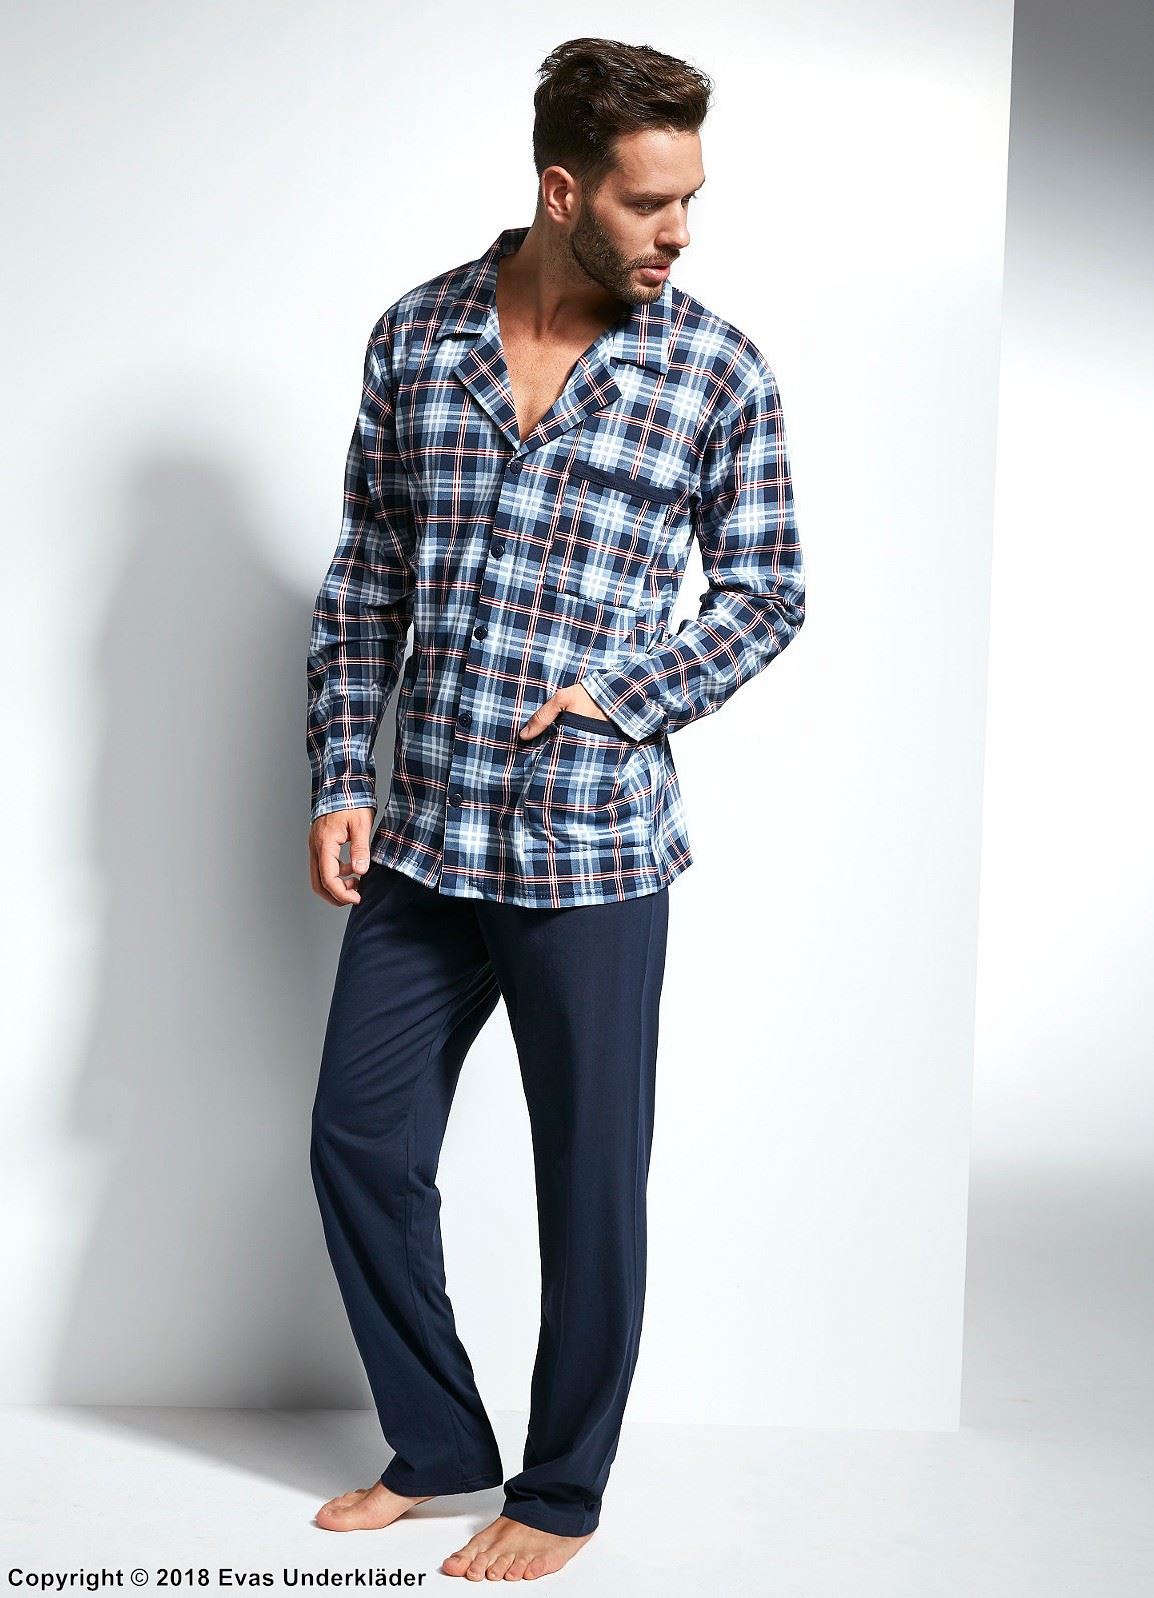 Men's top and pants pajamas, high quality cotton, pockets, scott-checkered pattern